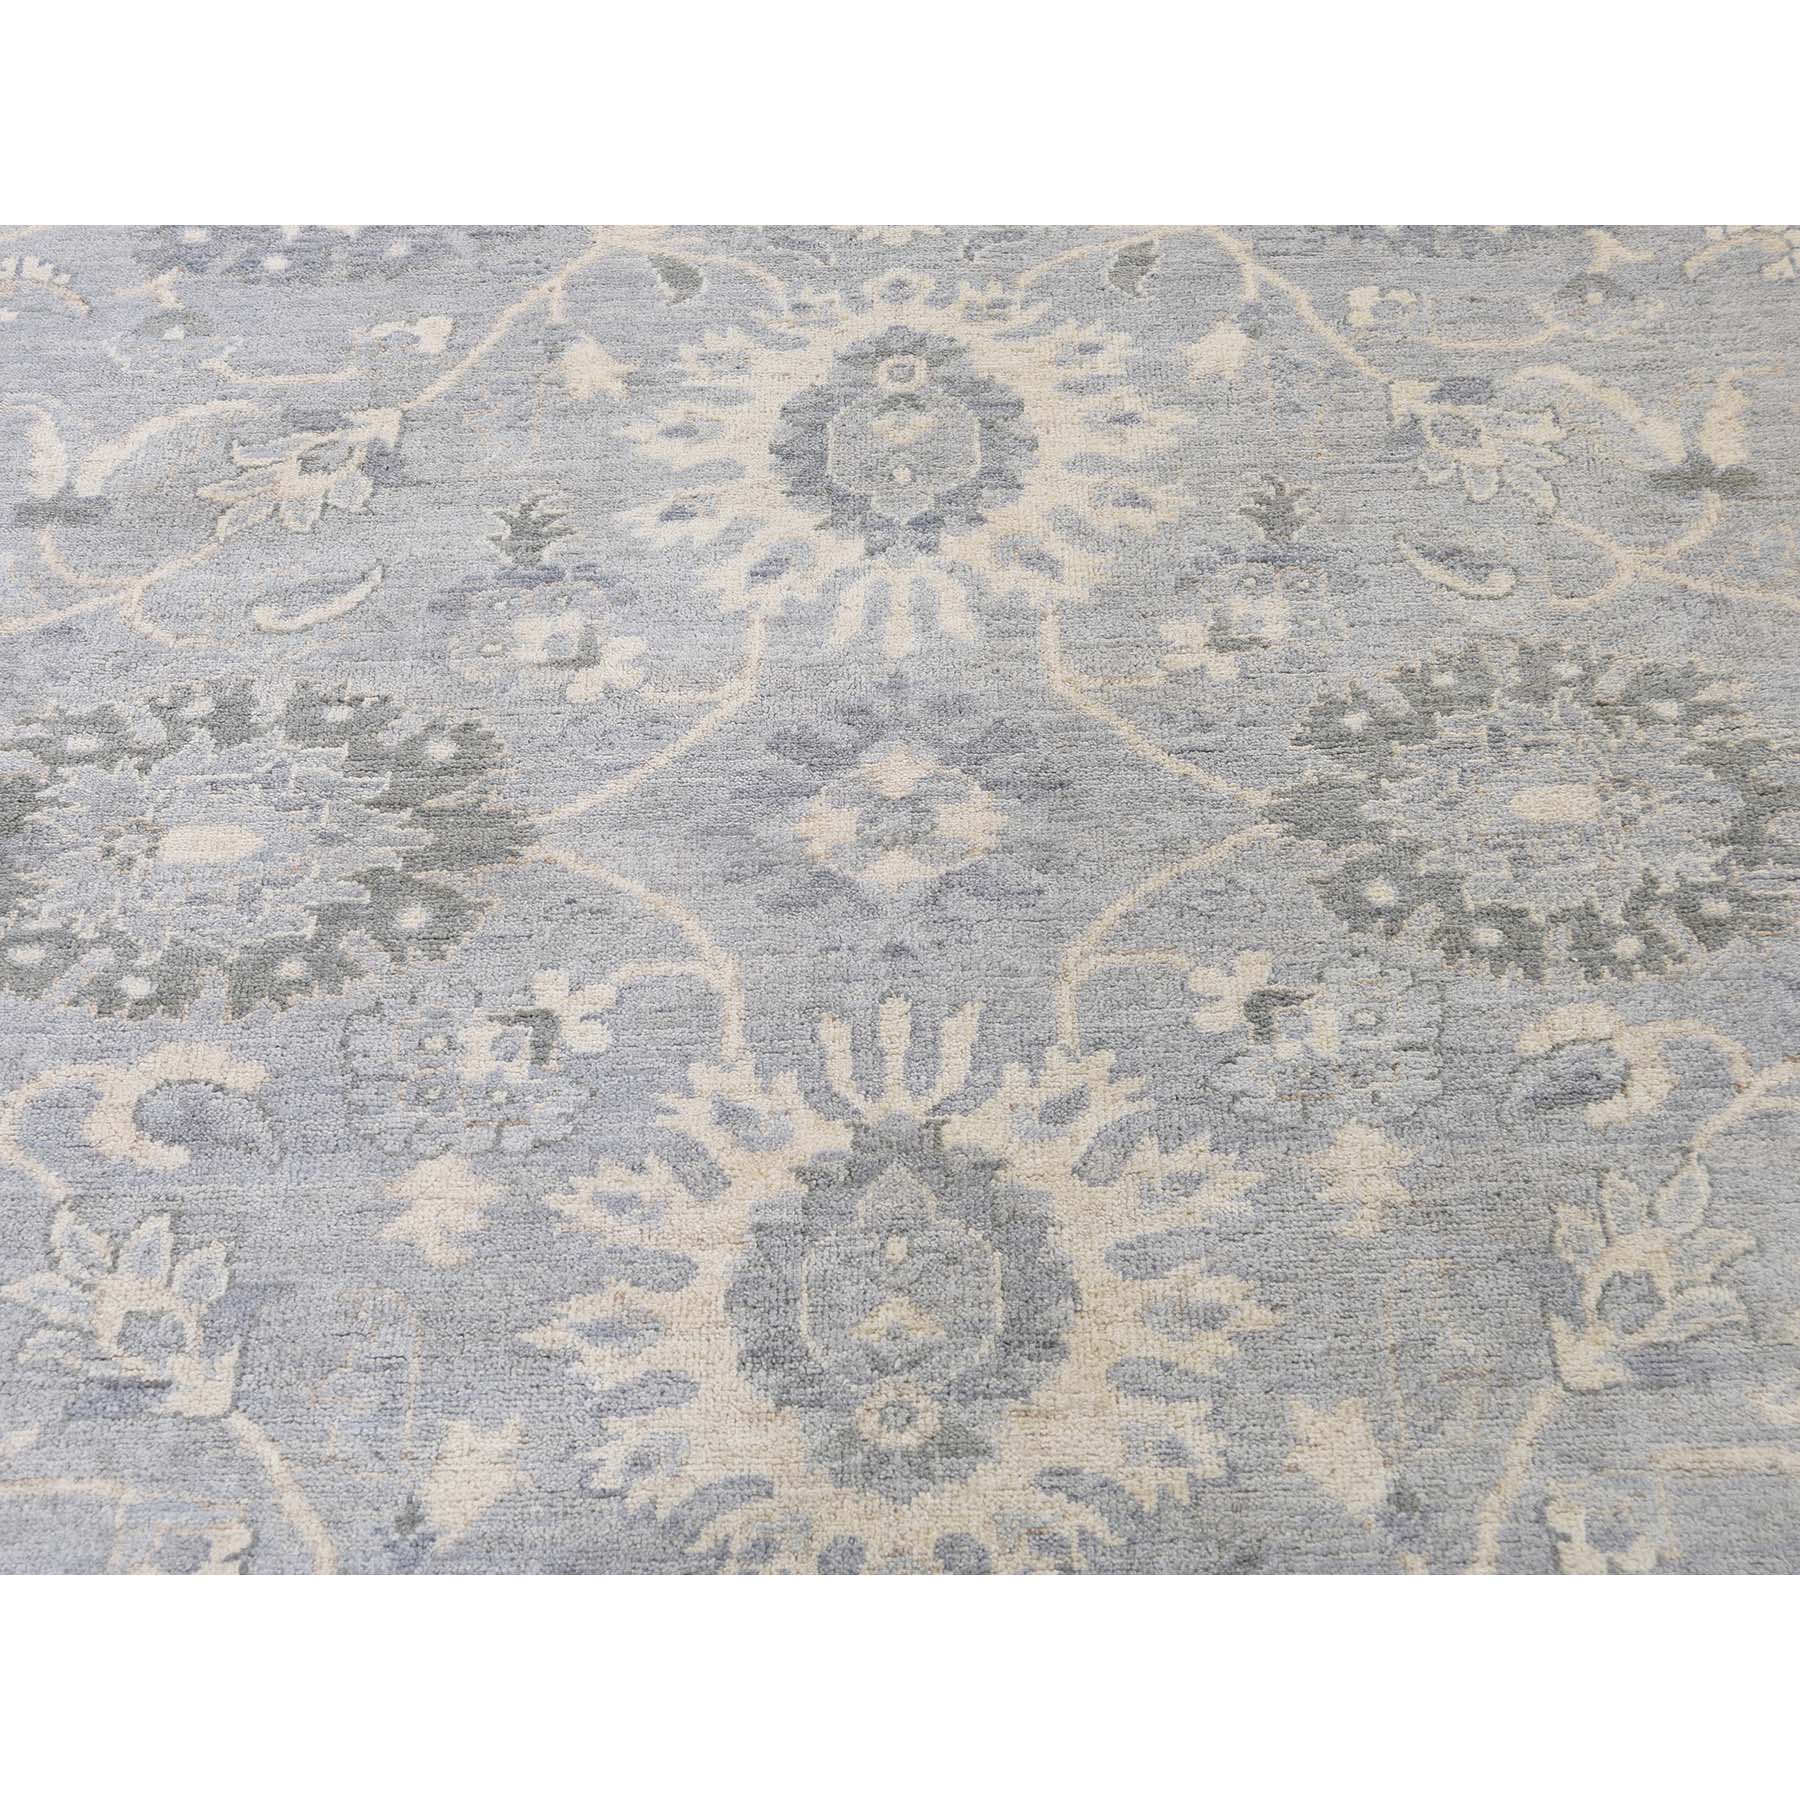 8-4 x9-10  Silver Wash Peshawar With Mahal Design Hand-Knotted Oriental Rug 